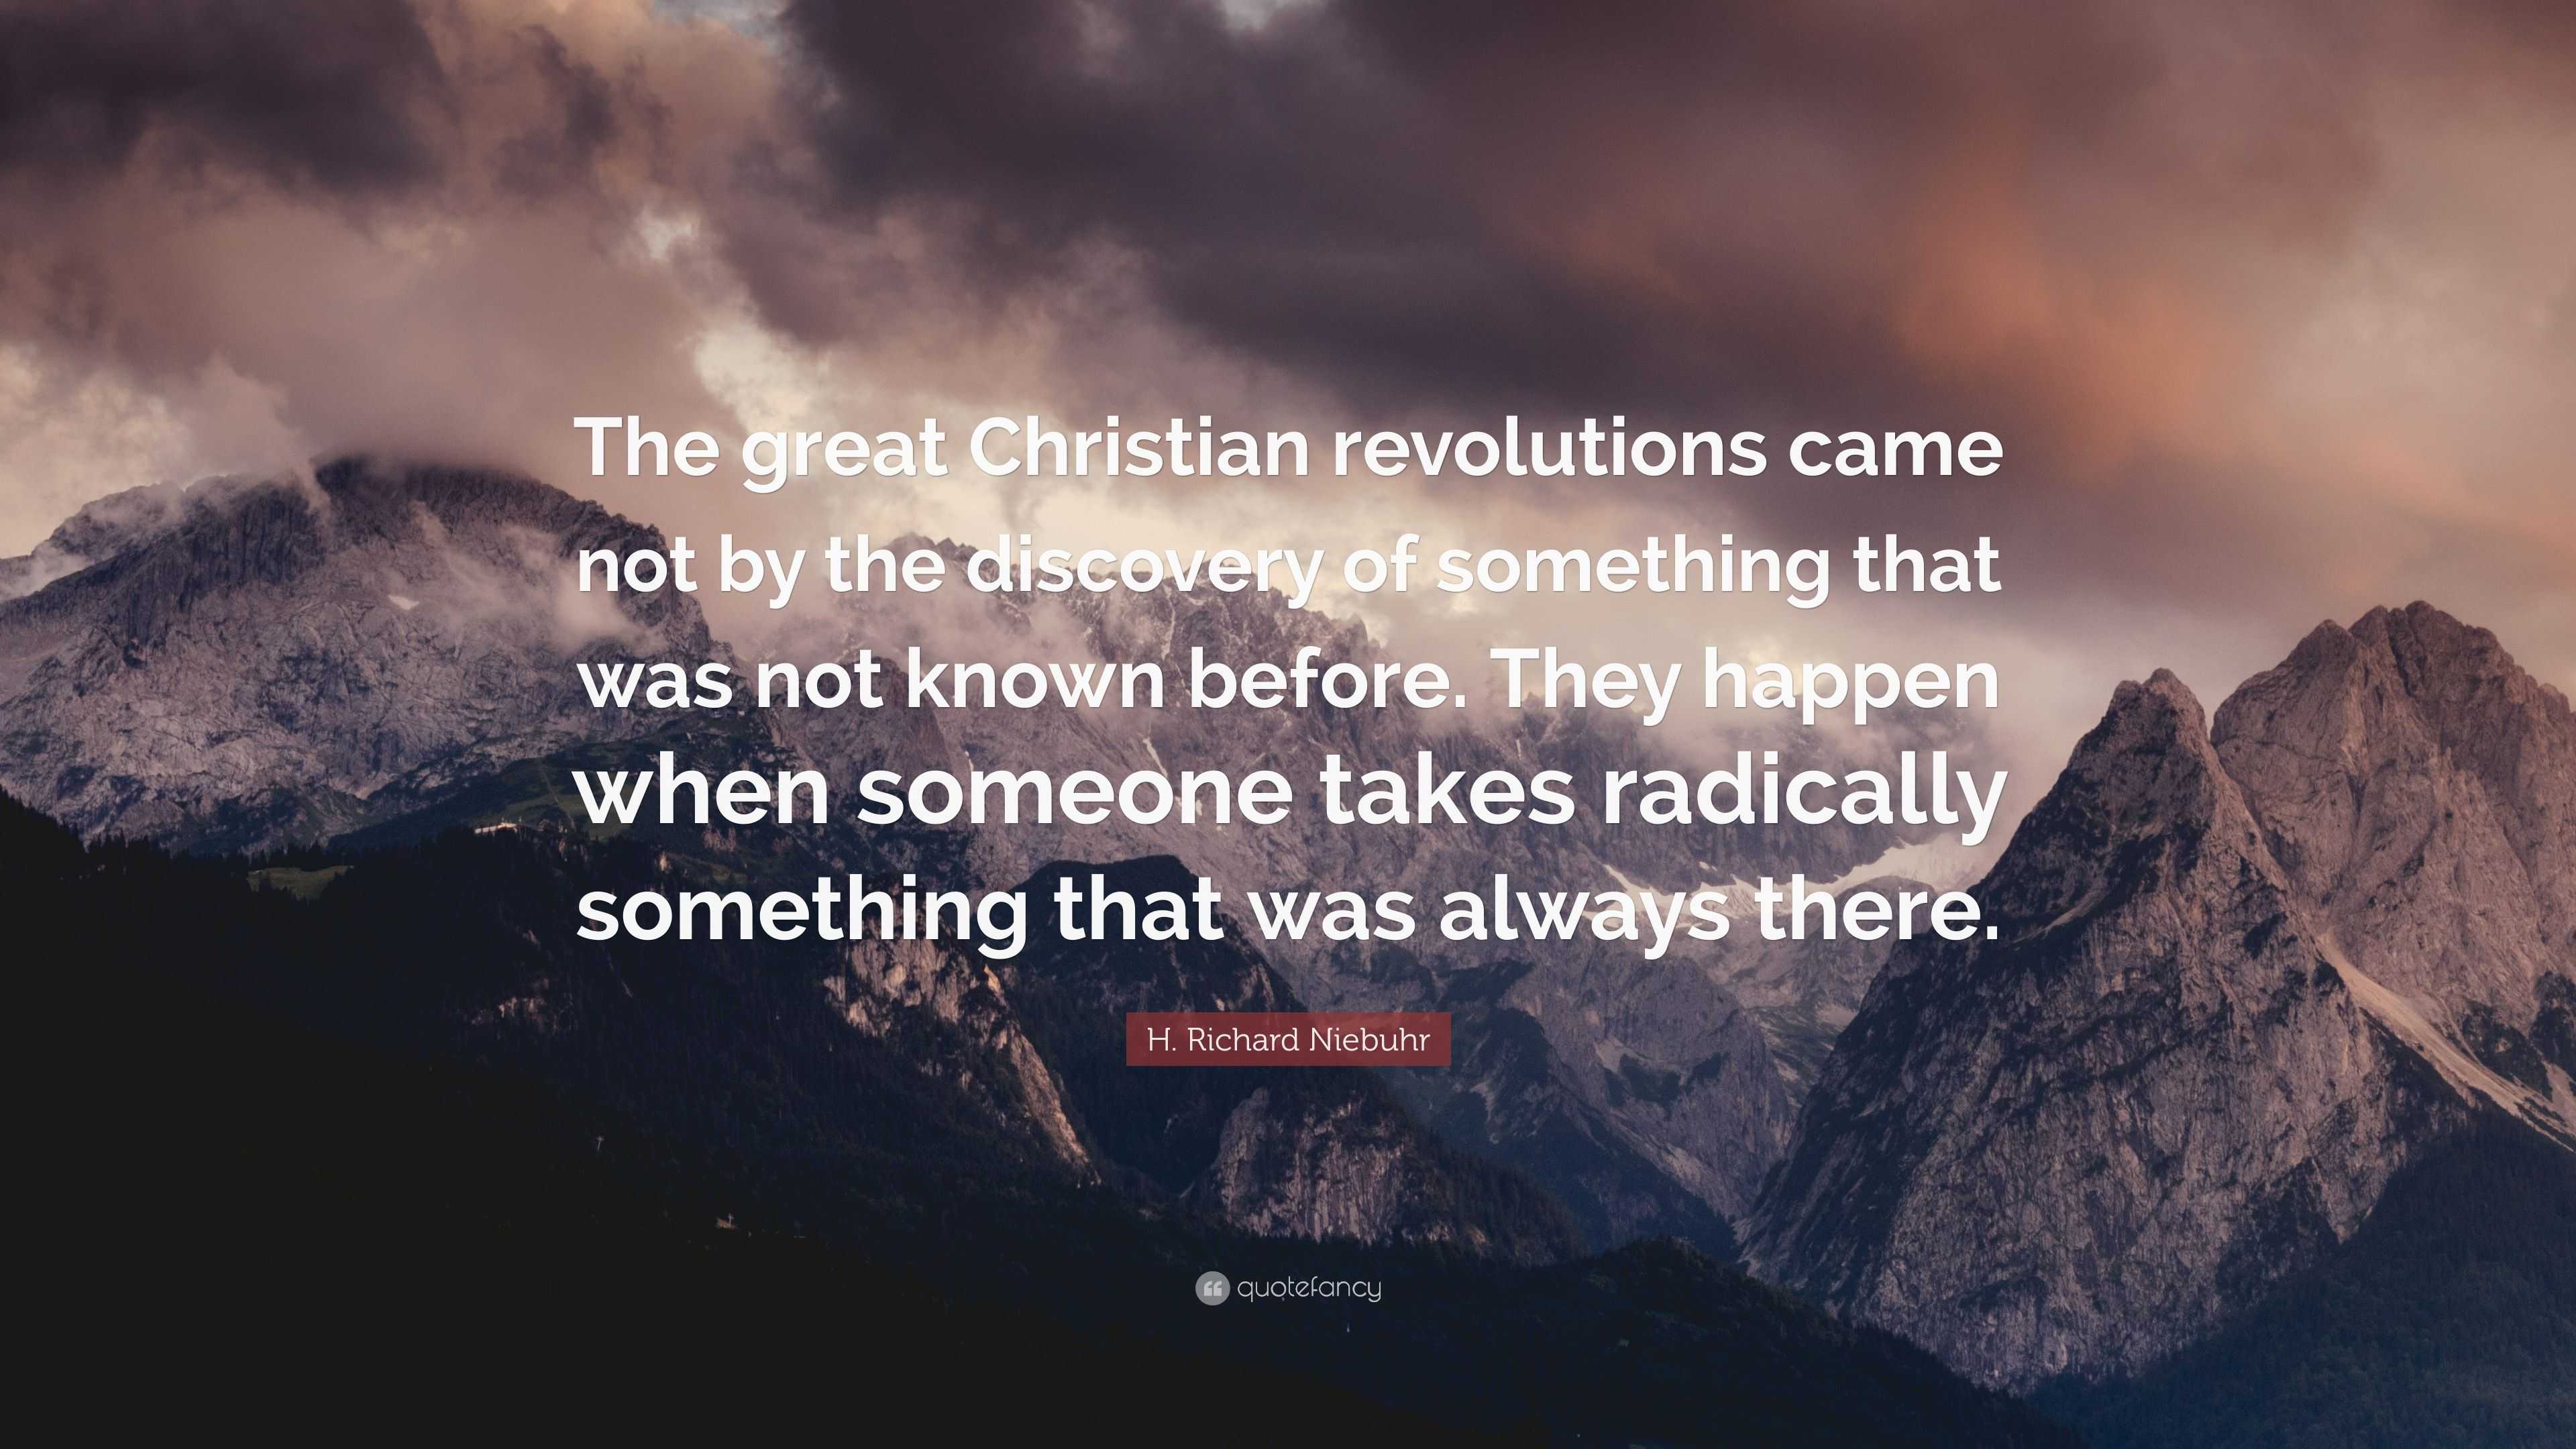 H. Richard Niebuhr Quote: “The great Christian revolutions came not by